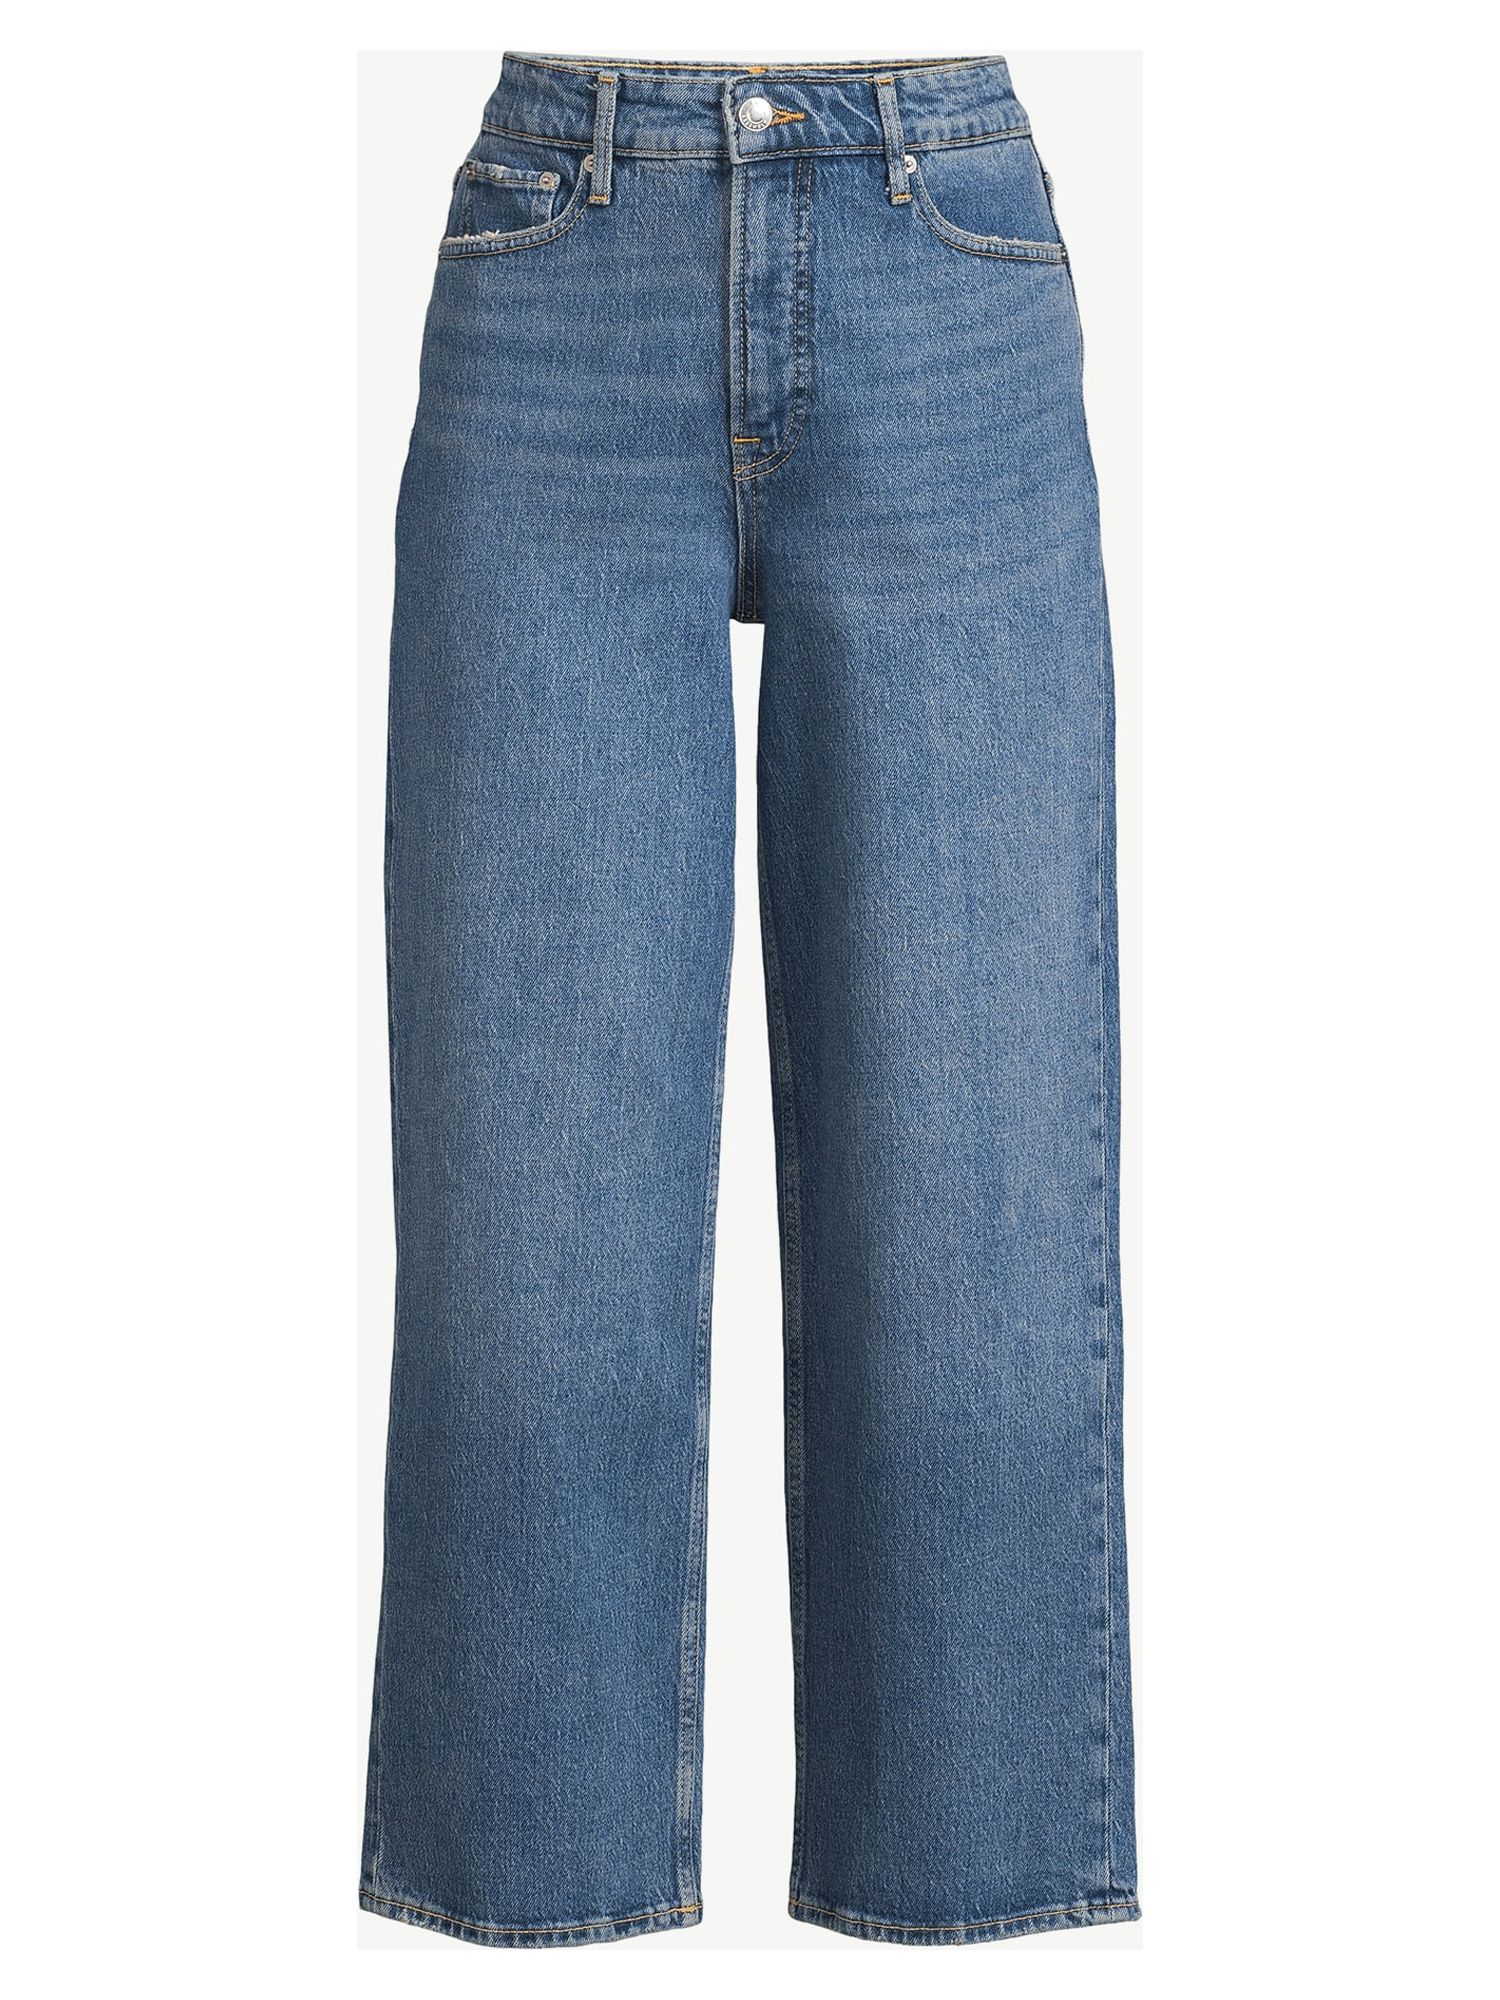 Free Assembly Women's Cropped Wide High Rise Straight Jeans - image 5 of 5